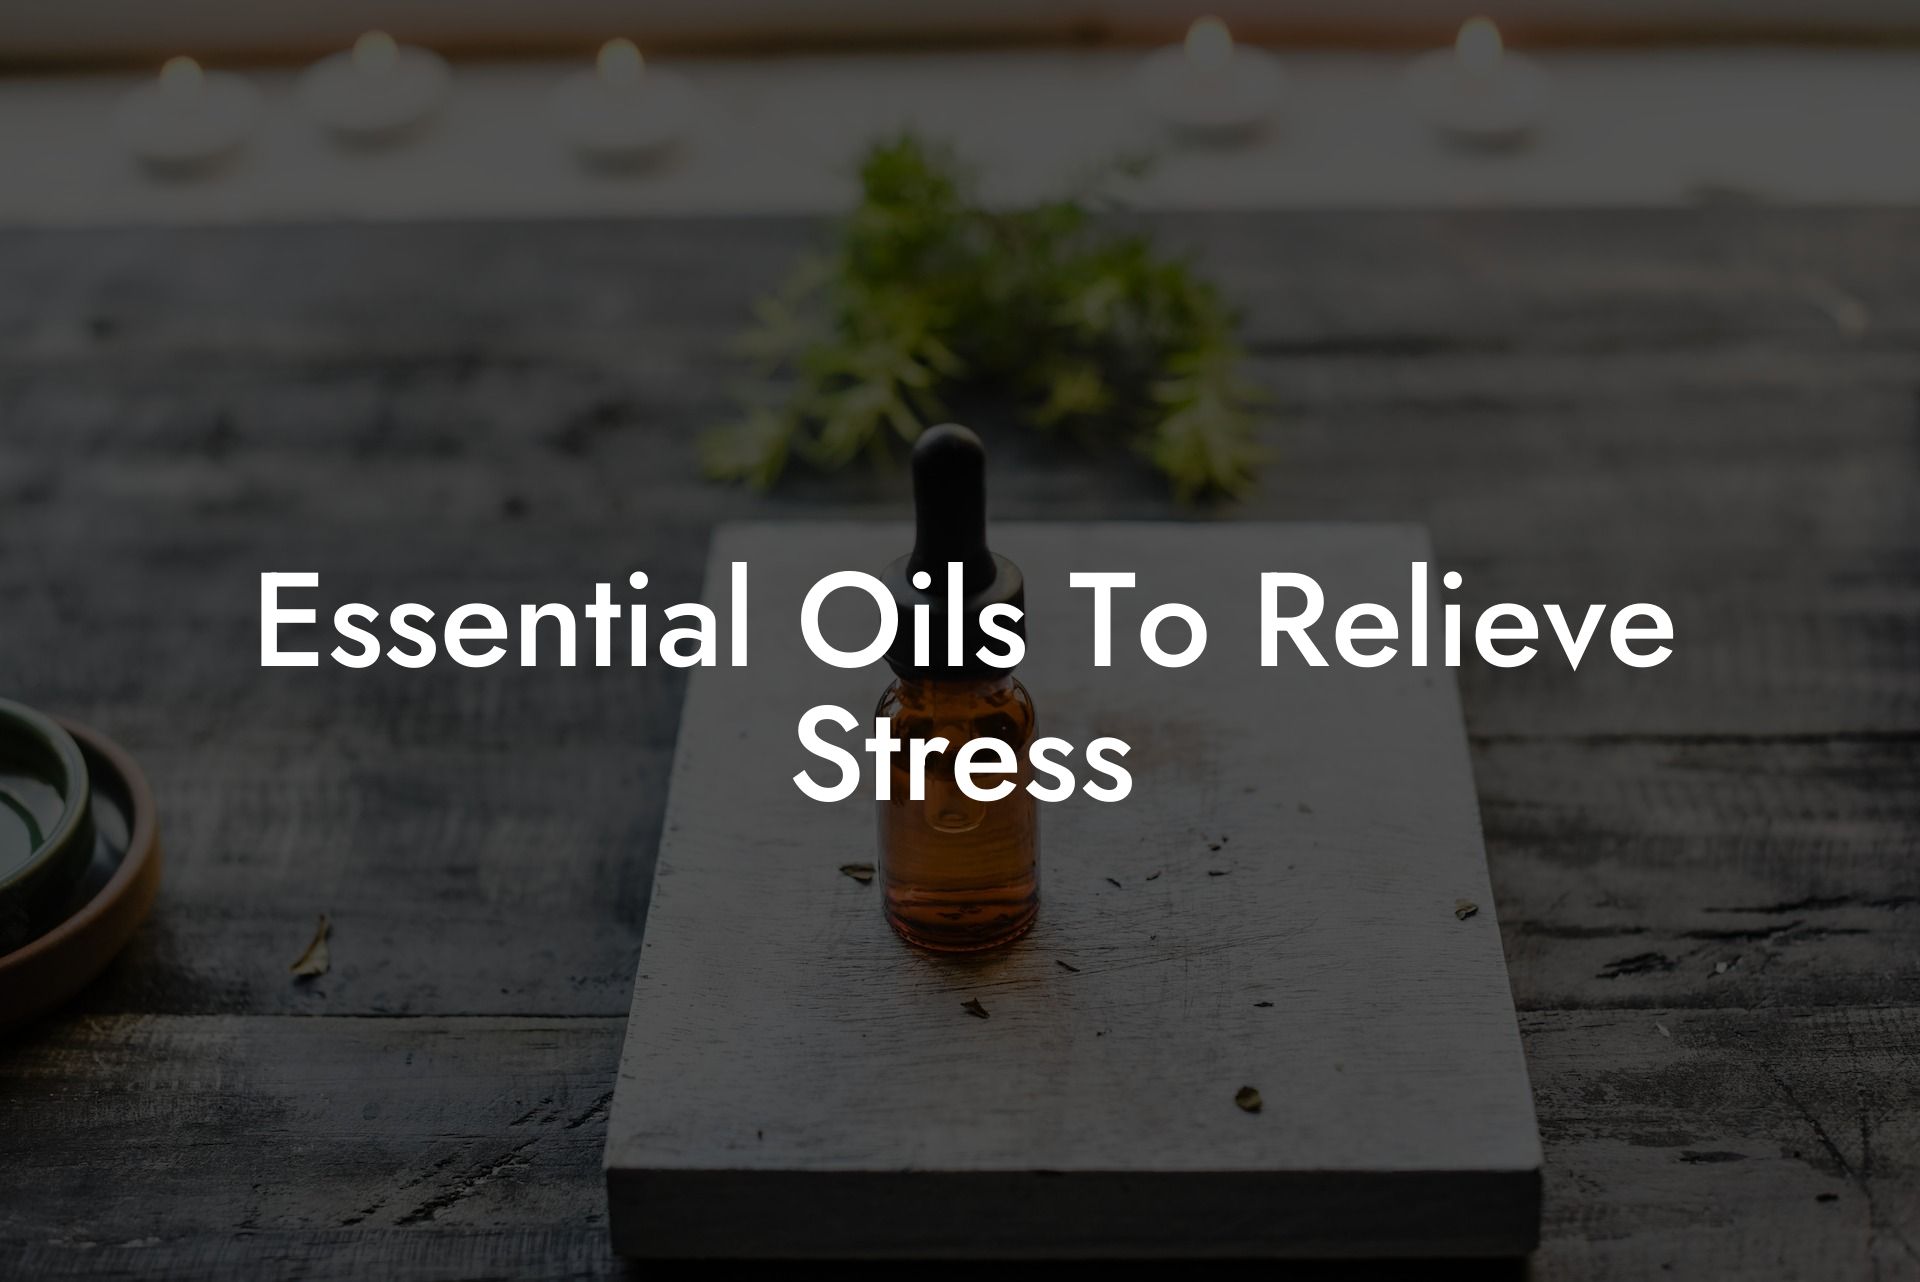 Essential Oils To Relieve Stress